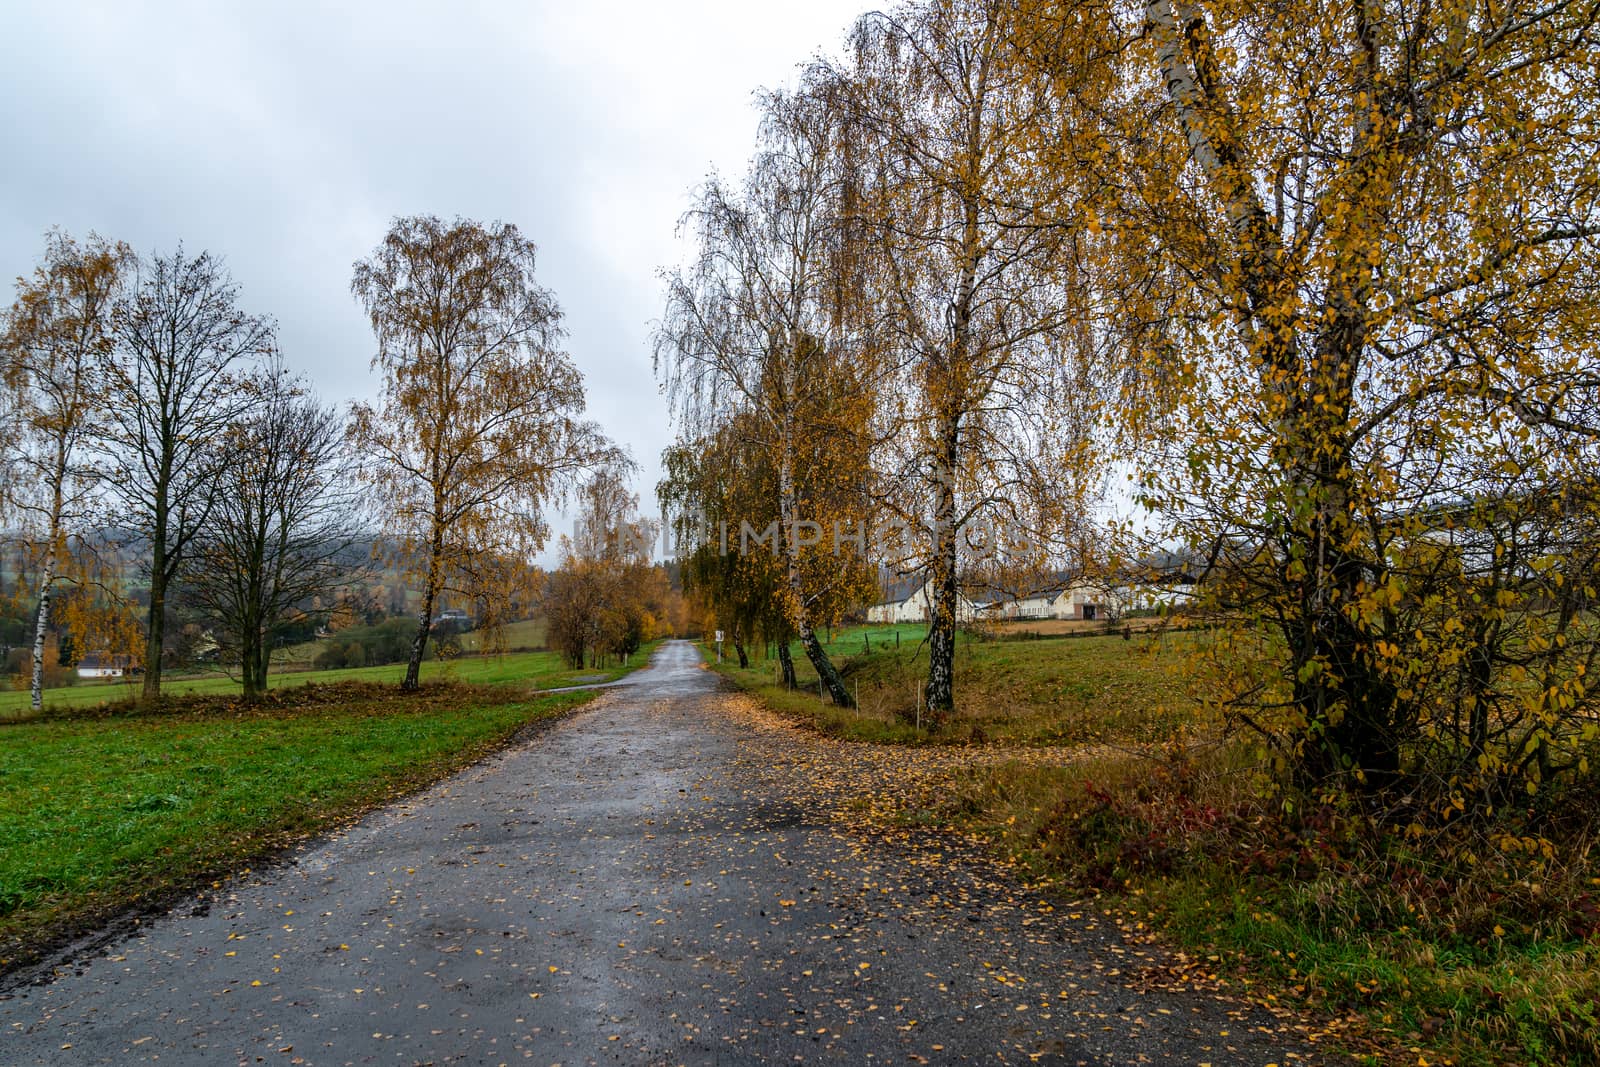 asphalt road in the countryside in autumn by Edophoto